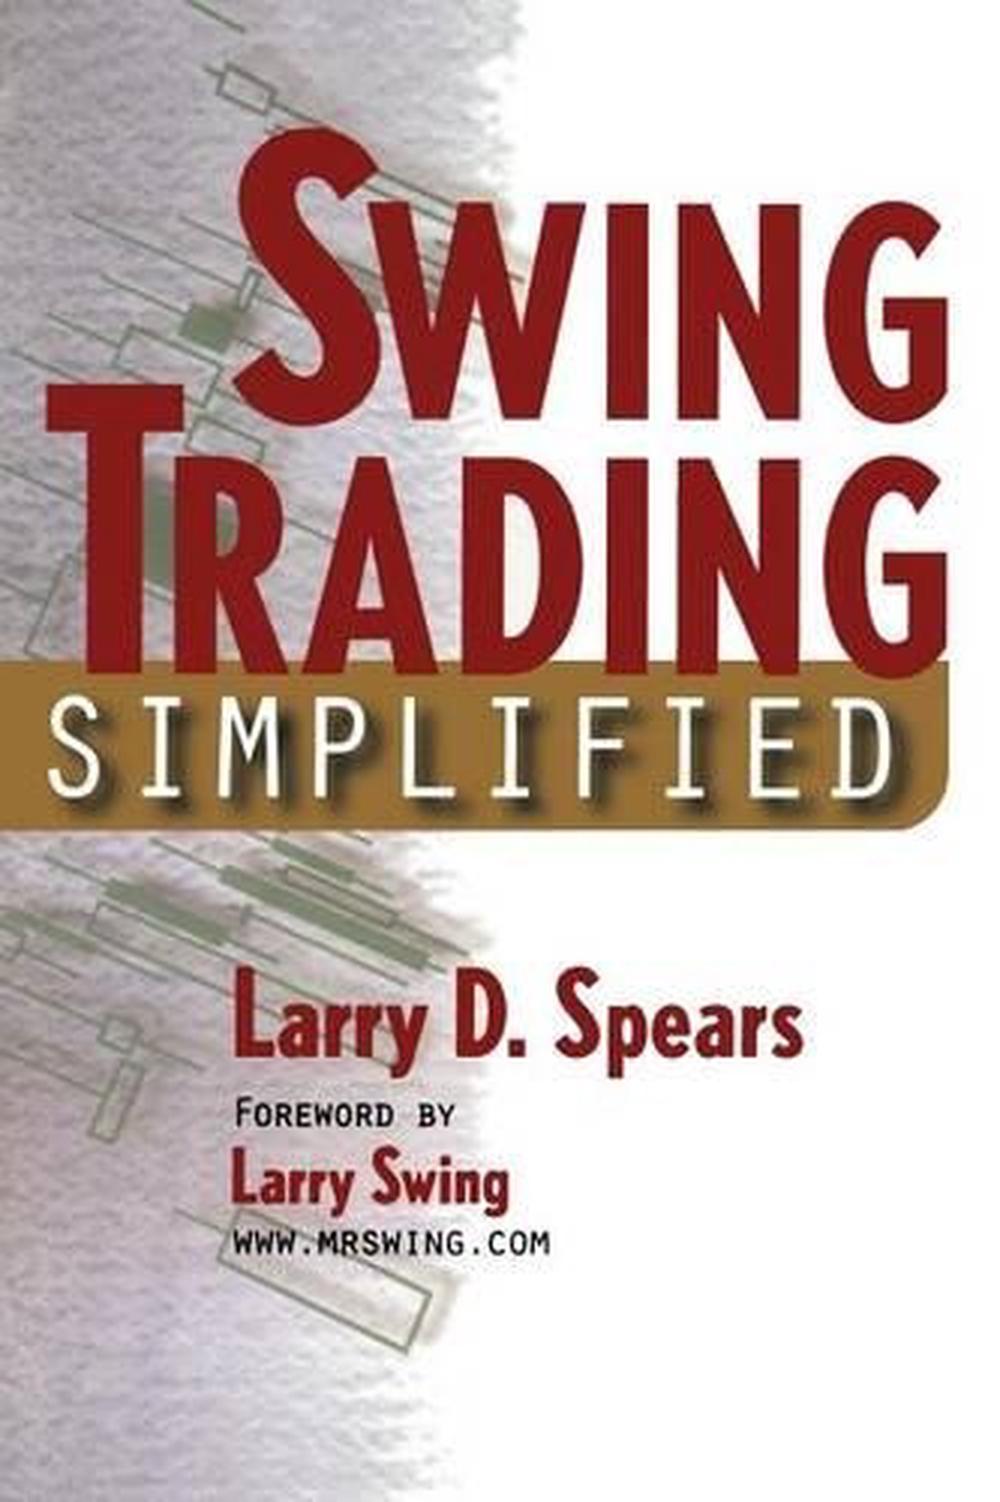 Swing Trading Simplified by Larry D. Spears (English) Paperback Book